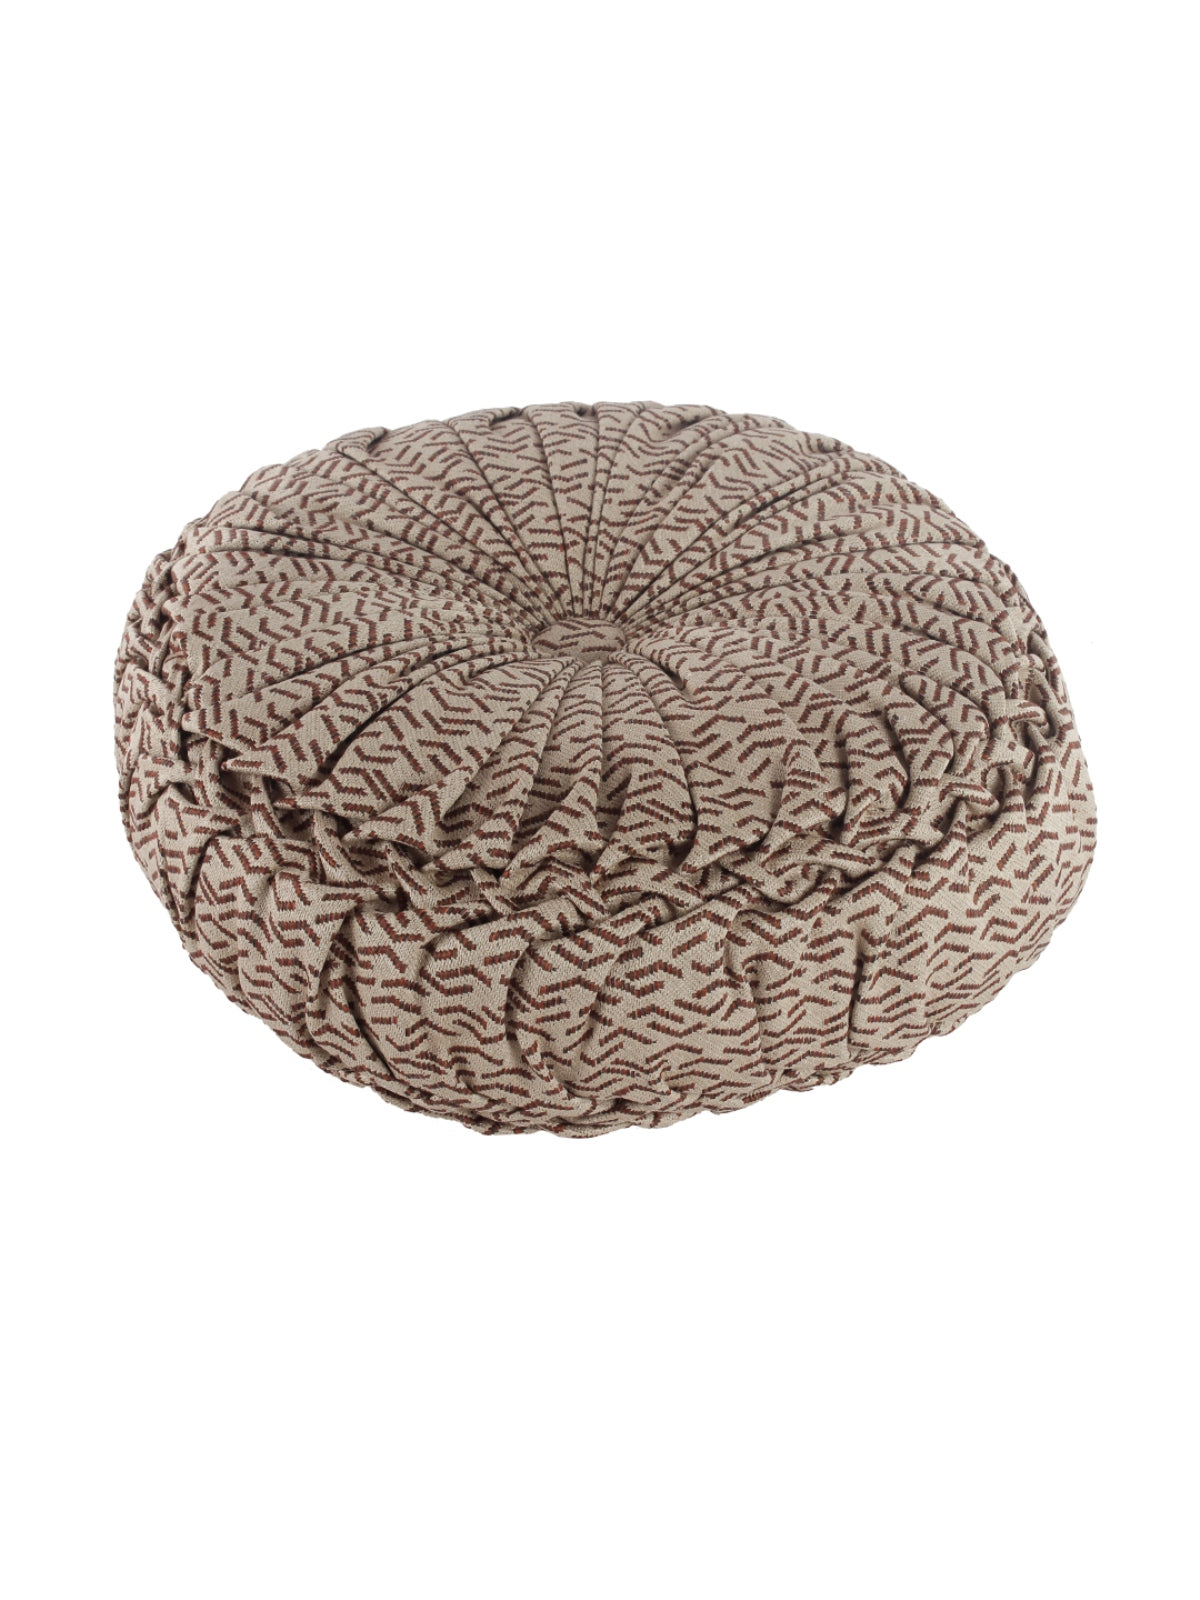 Beige & Brown Set of 2 Geometric Patterned Round Shape Cushions